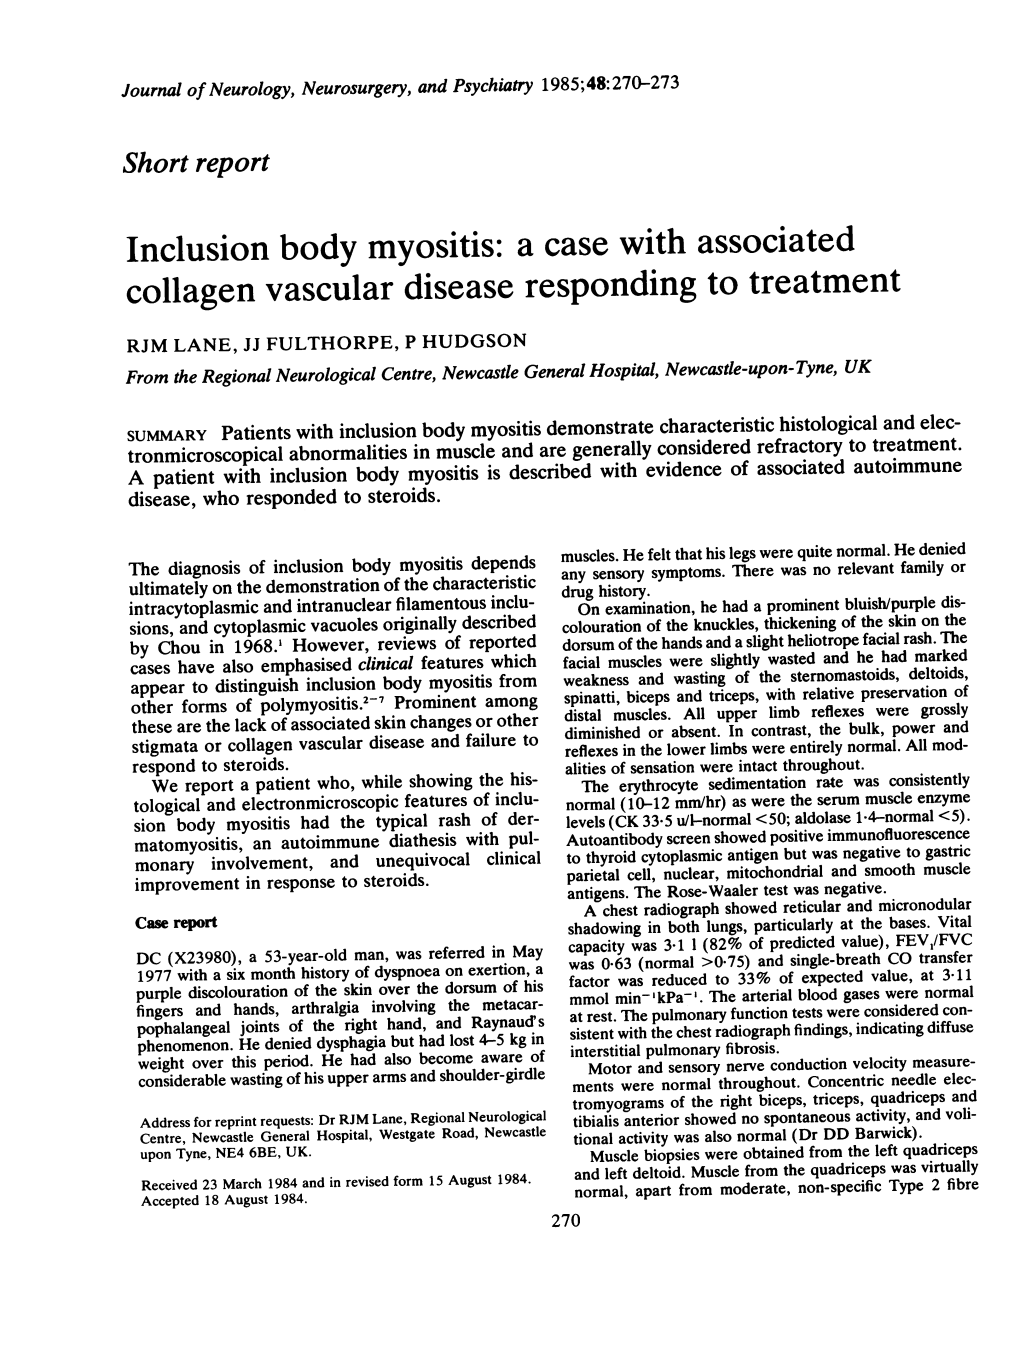 Inclusion Body Myositis: a Case with Associated Collagen Vascular Disease Responding to Treatment